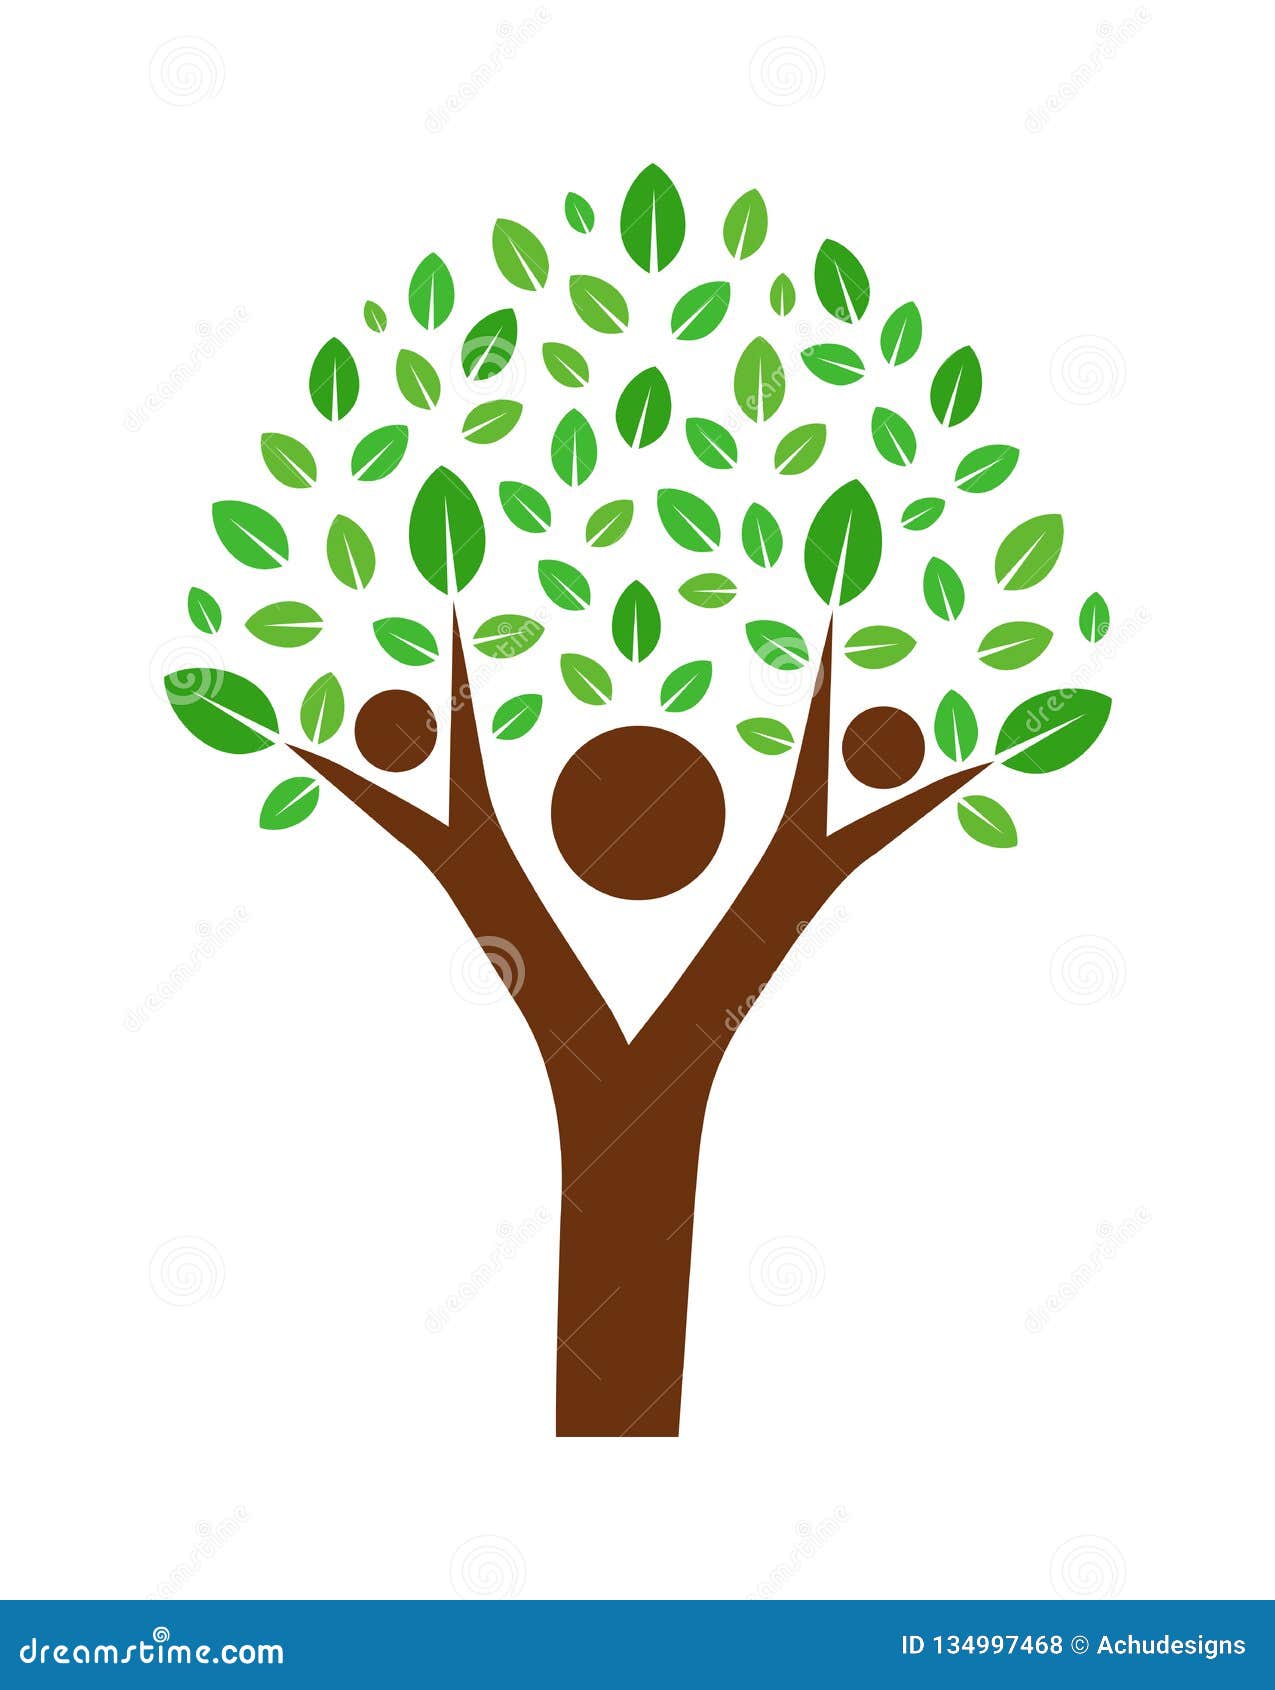 Family tree stock vector. Illustration of expressions - 134997468